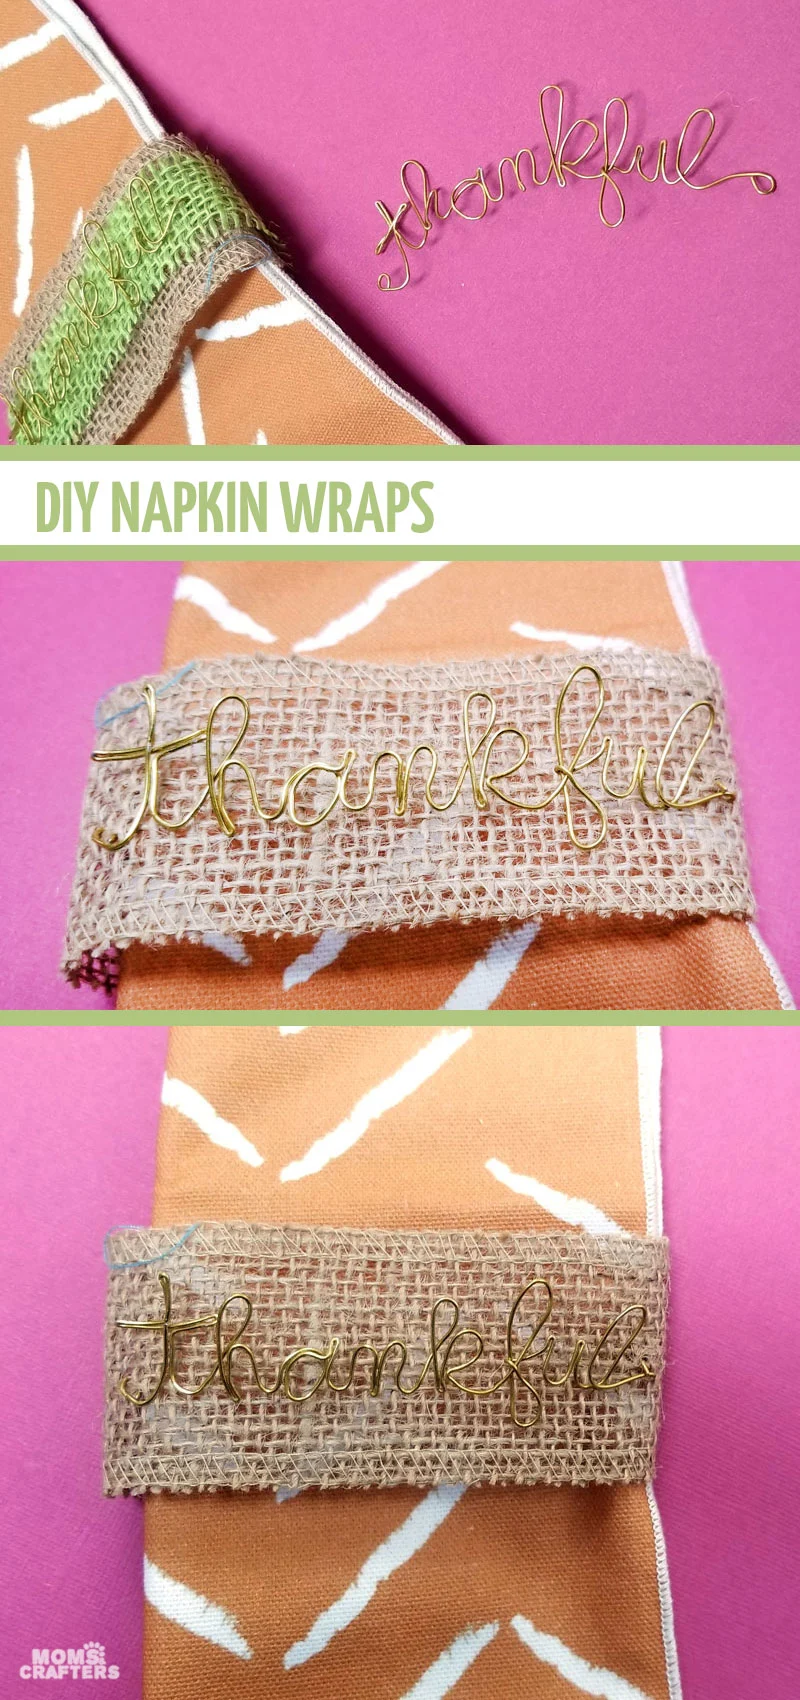 Click to learn how to make your own DIY Thanksgiving napkin rings with wire and burlap